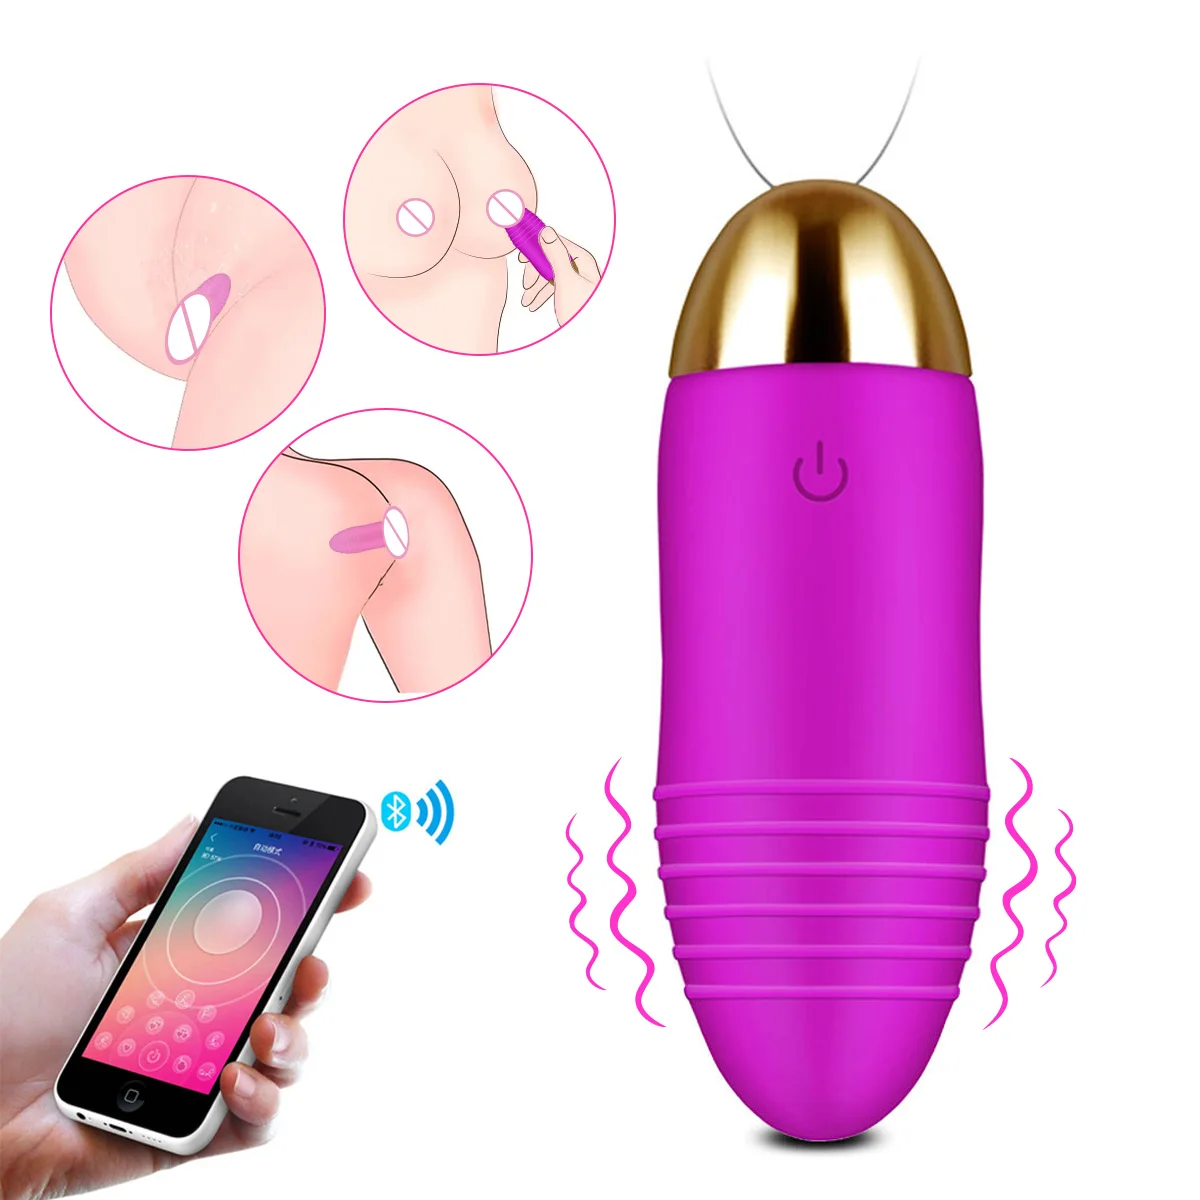 Source Intelligent 10 Mode Sex Toys Vibrating Silicone Phone APP Wifi Wireless Remote Control Blue Tooth Egg Vibrator for Woman Vagina on m.alibaba